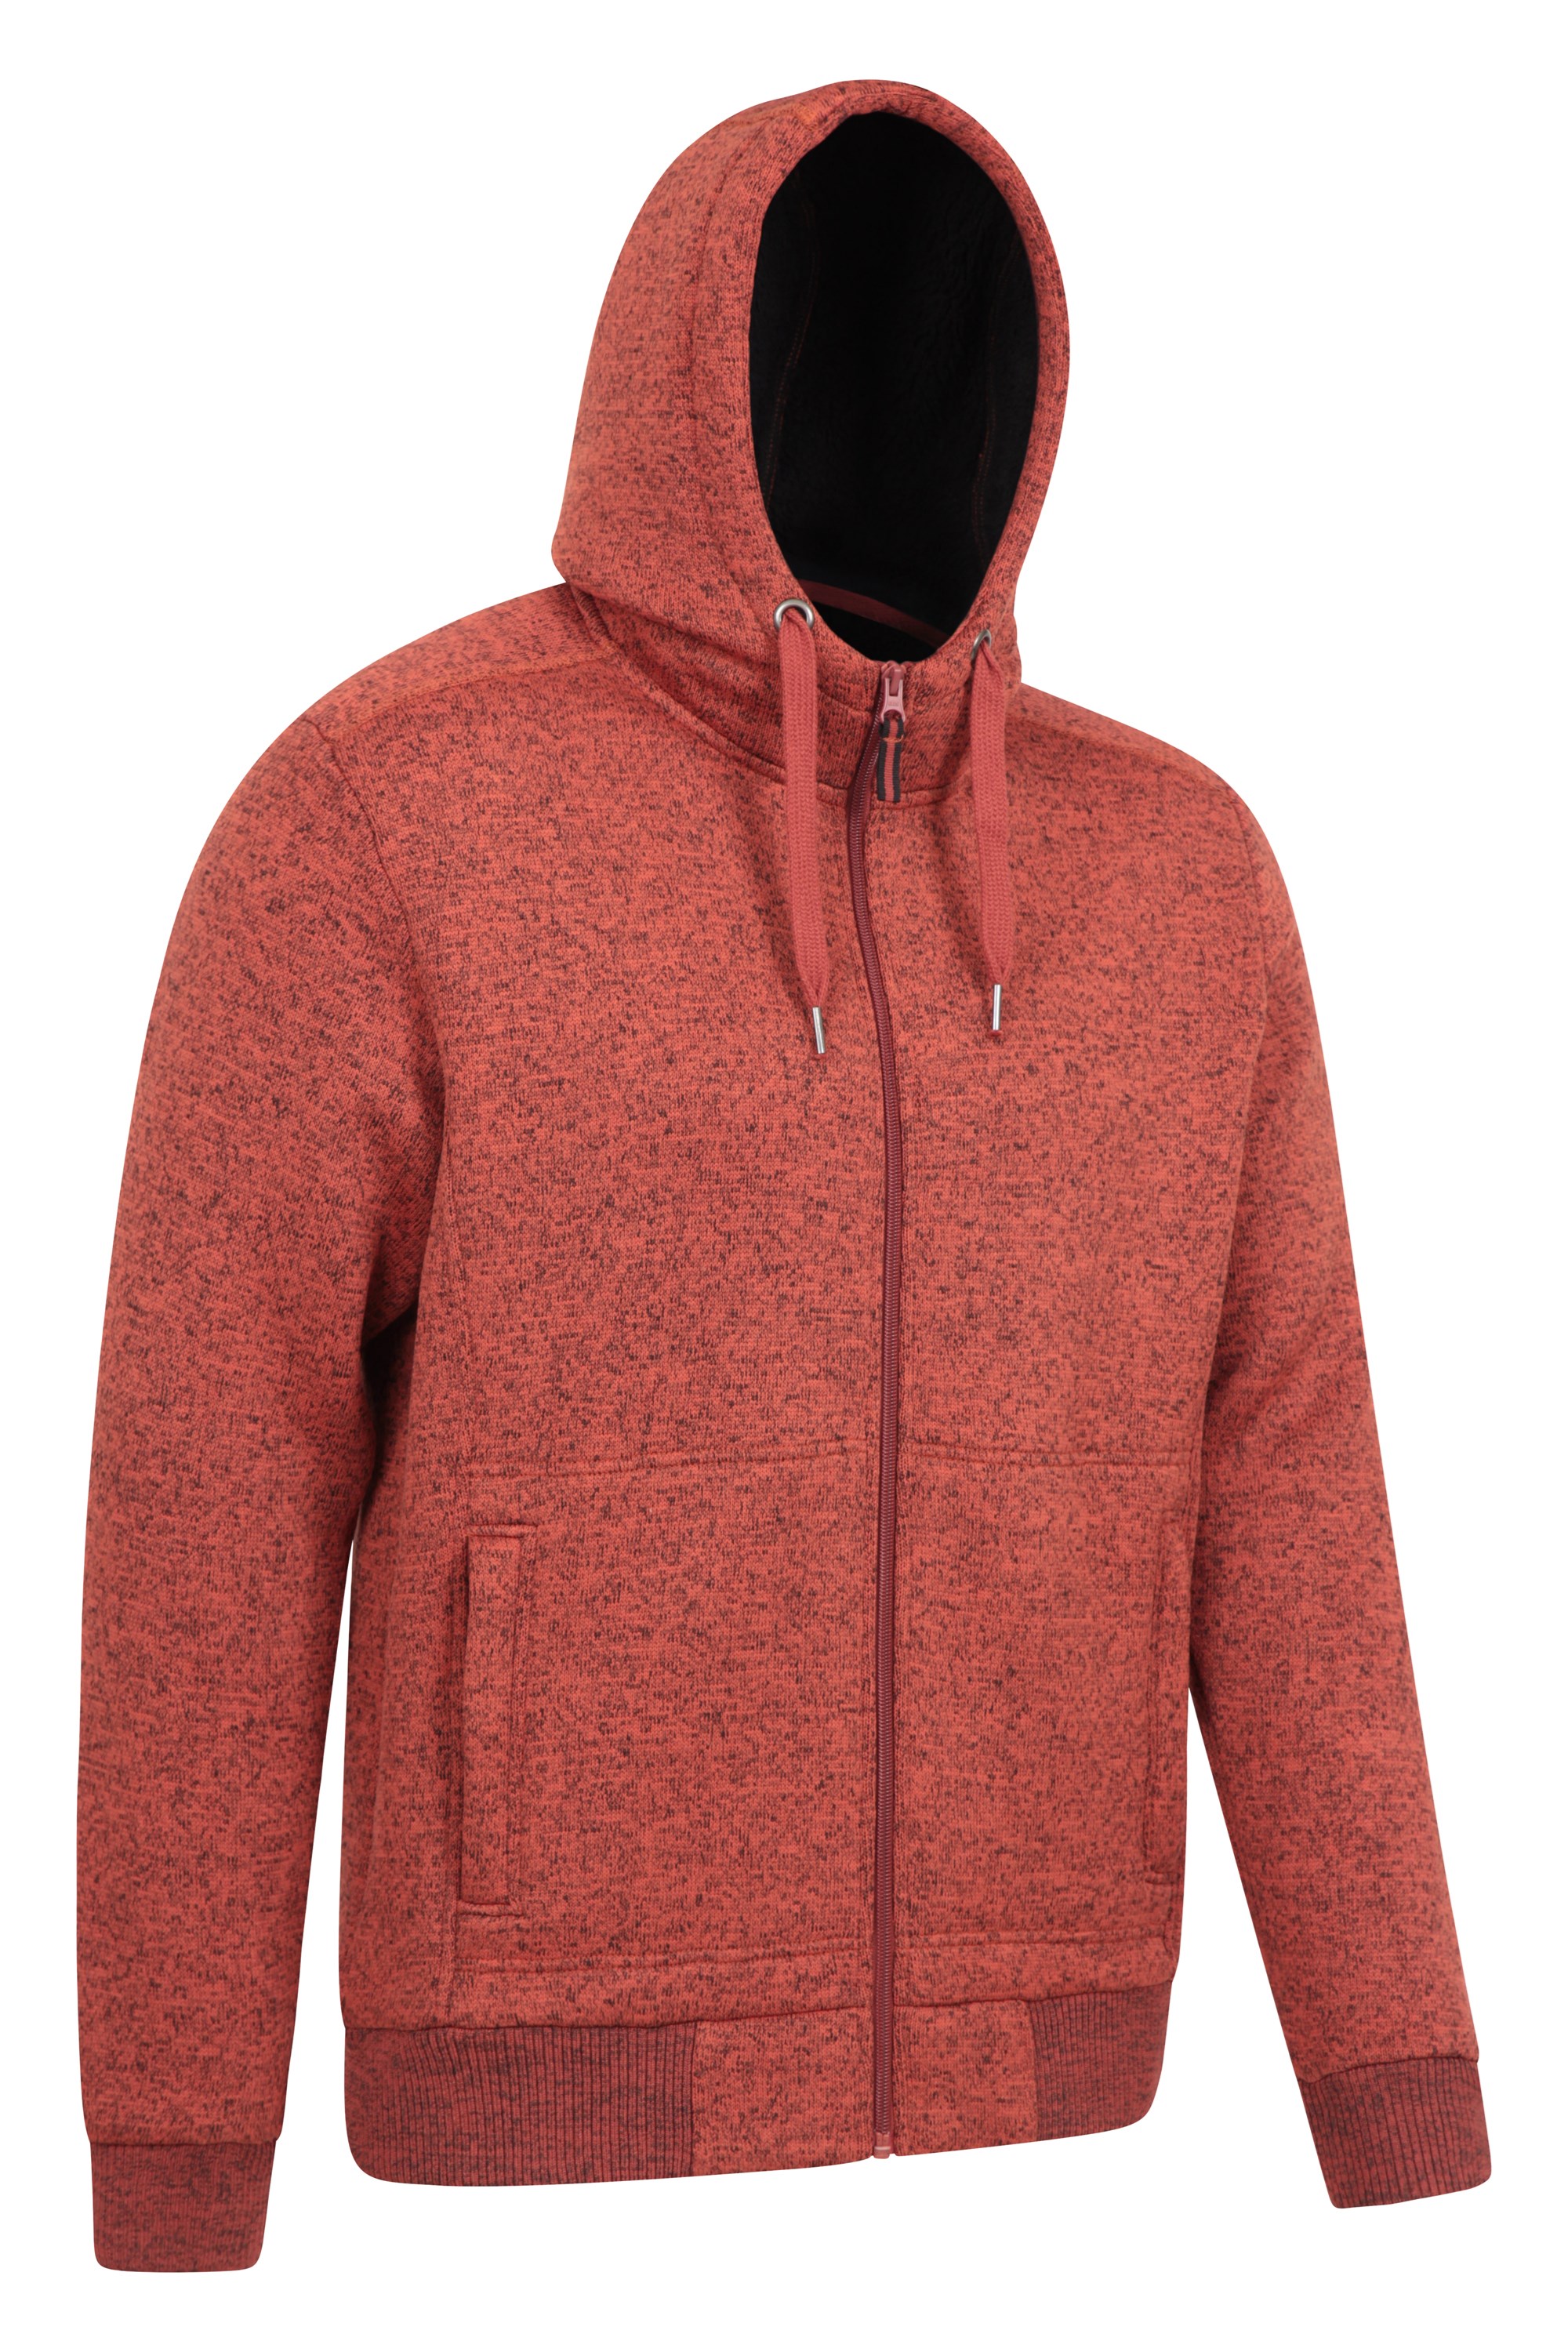 Oversized Thermal-Lined Pullover Hoodie for Men